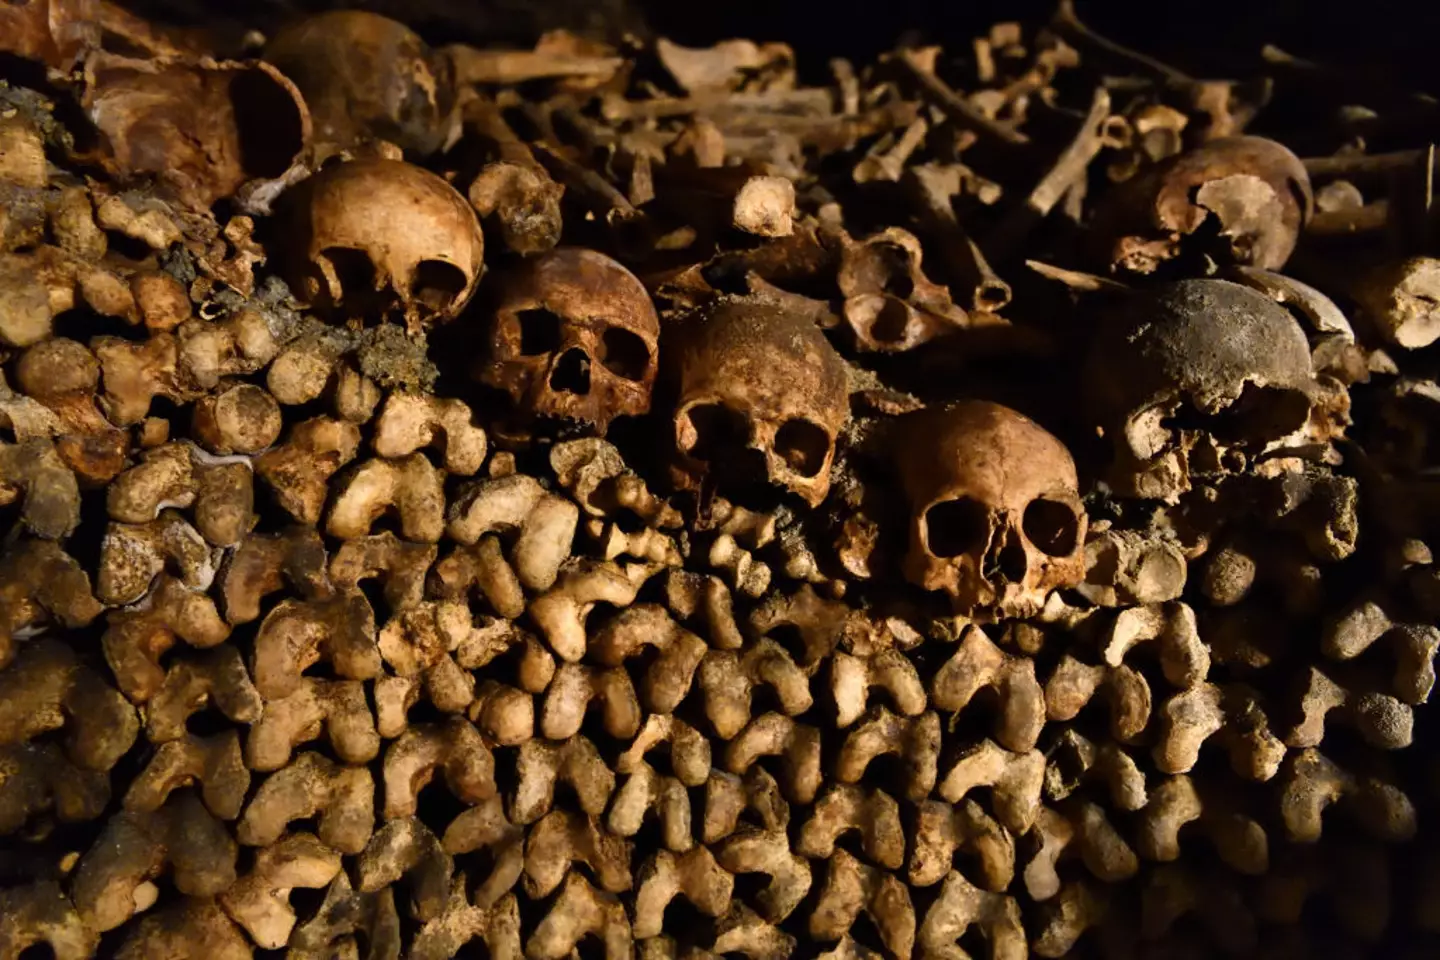 The Paris Catacombs were opened after the city's cemeteries became overcrowded in the 1700s.